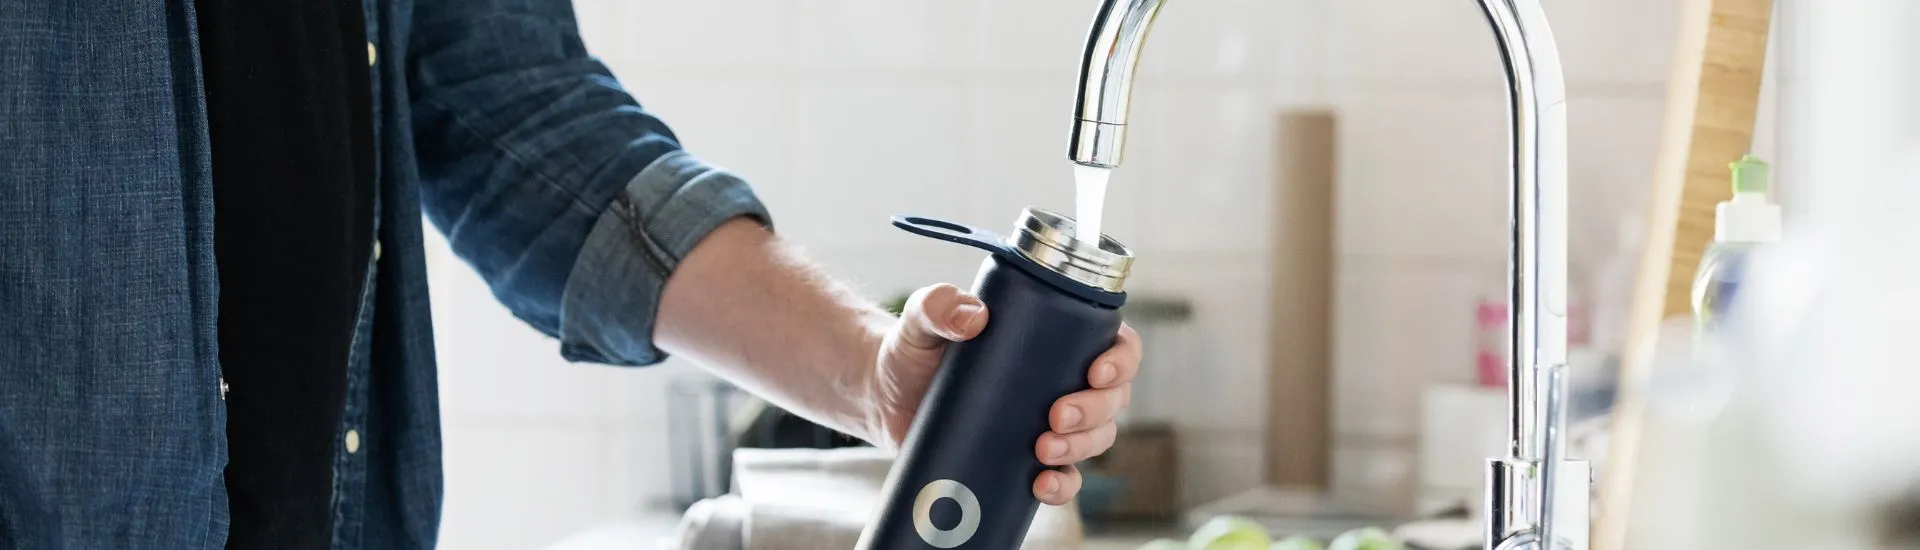 filling up a reusable water bottle